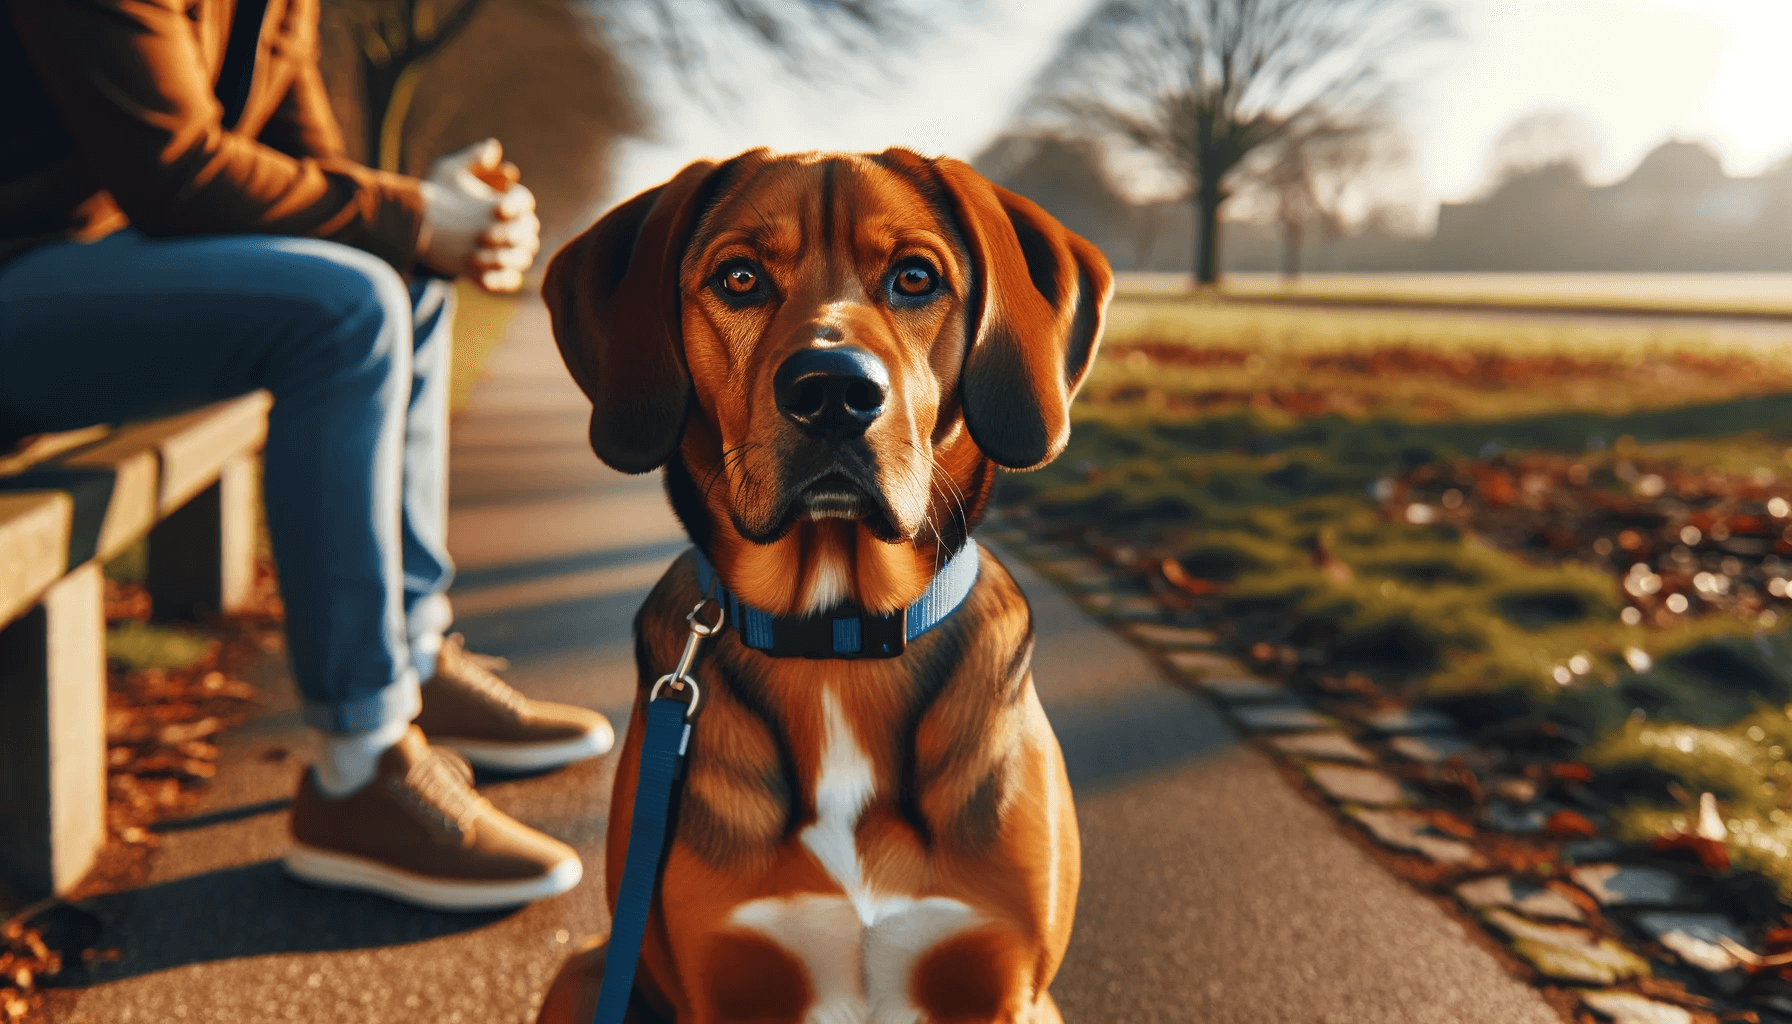 Coonhound Labrador Mix Dog Sitting on a Paved Path with a Person Partially Visible to the Left